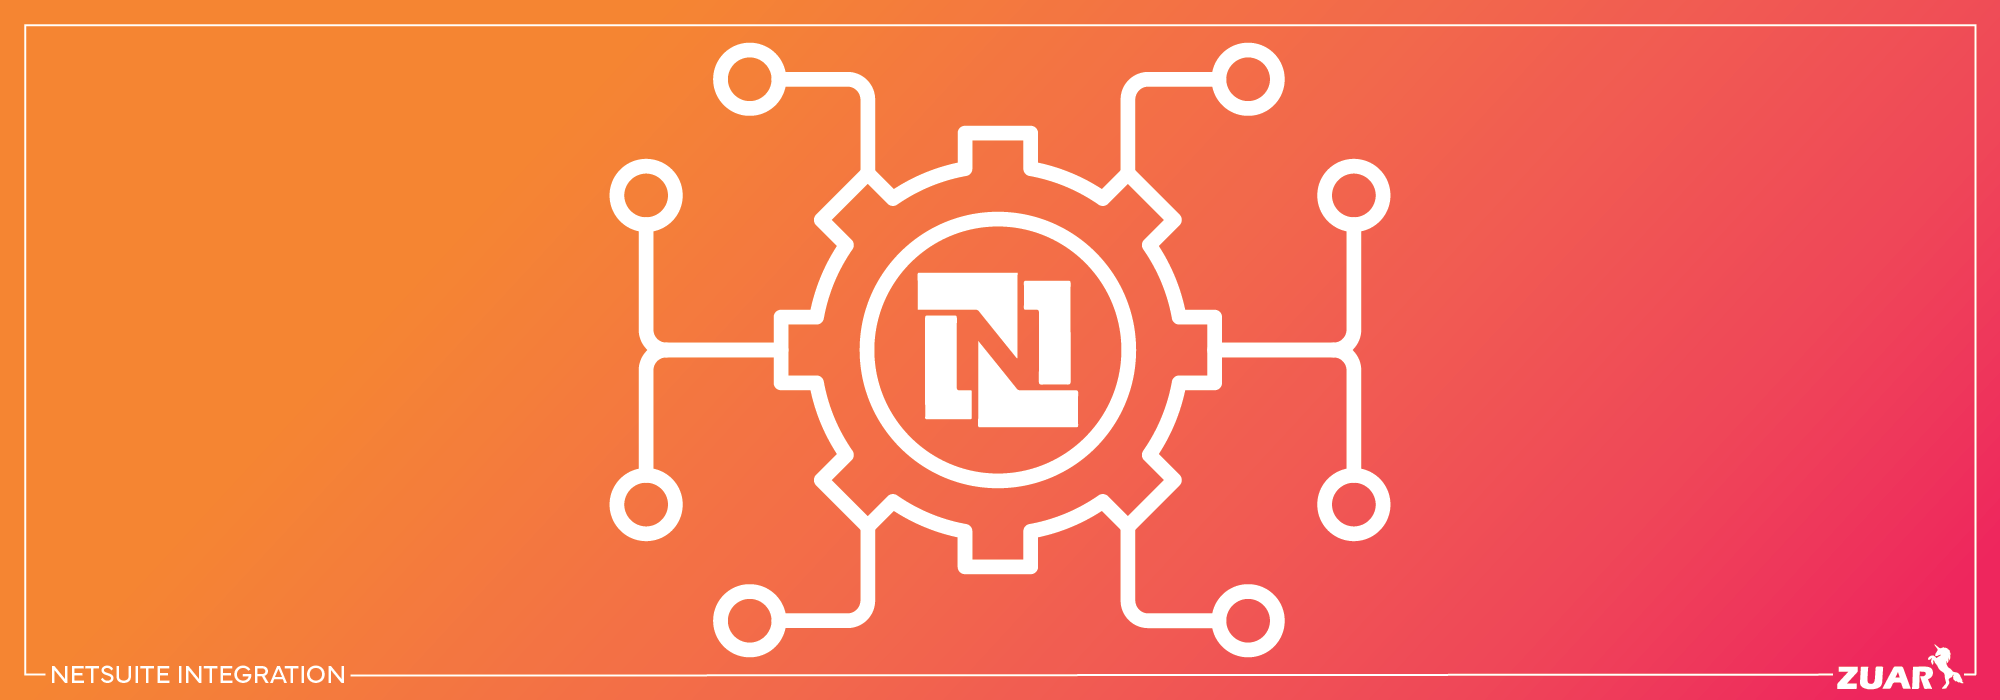 How to integrate NetSuite